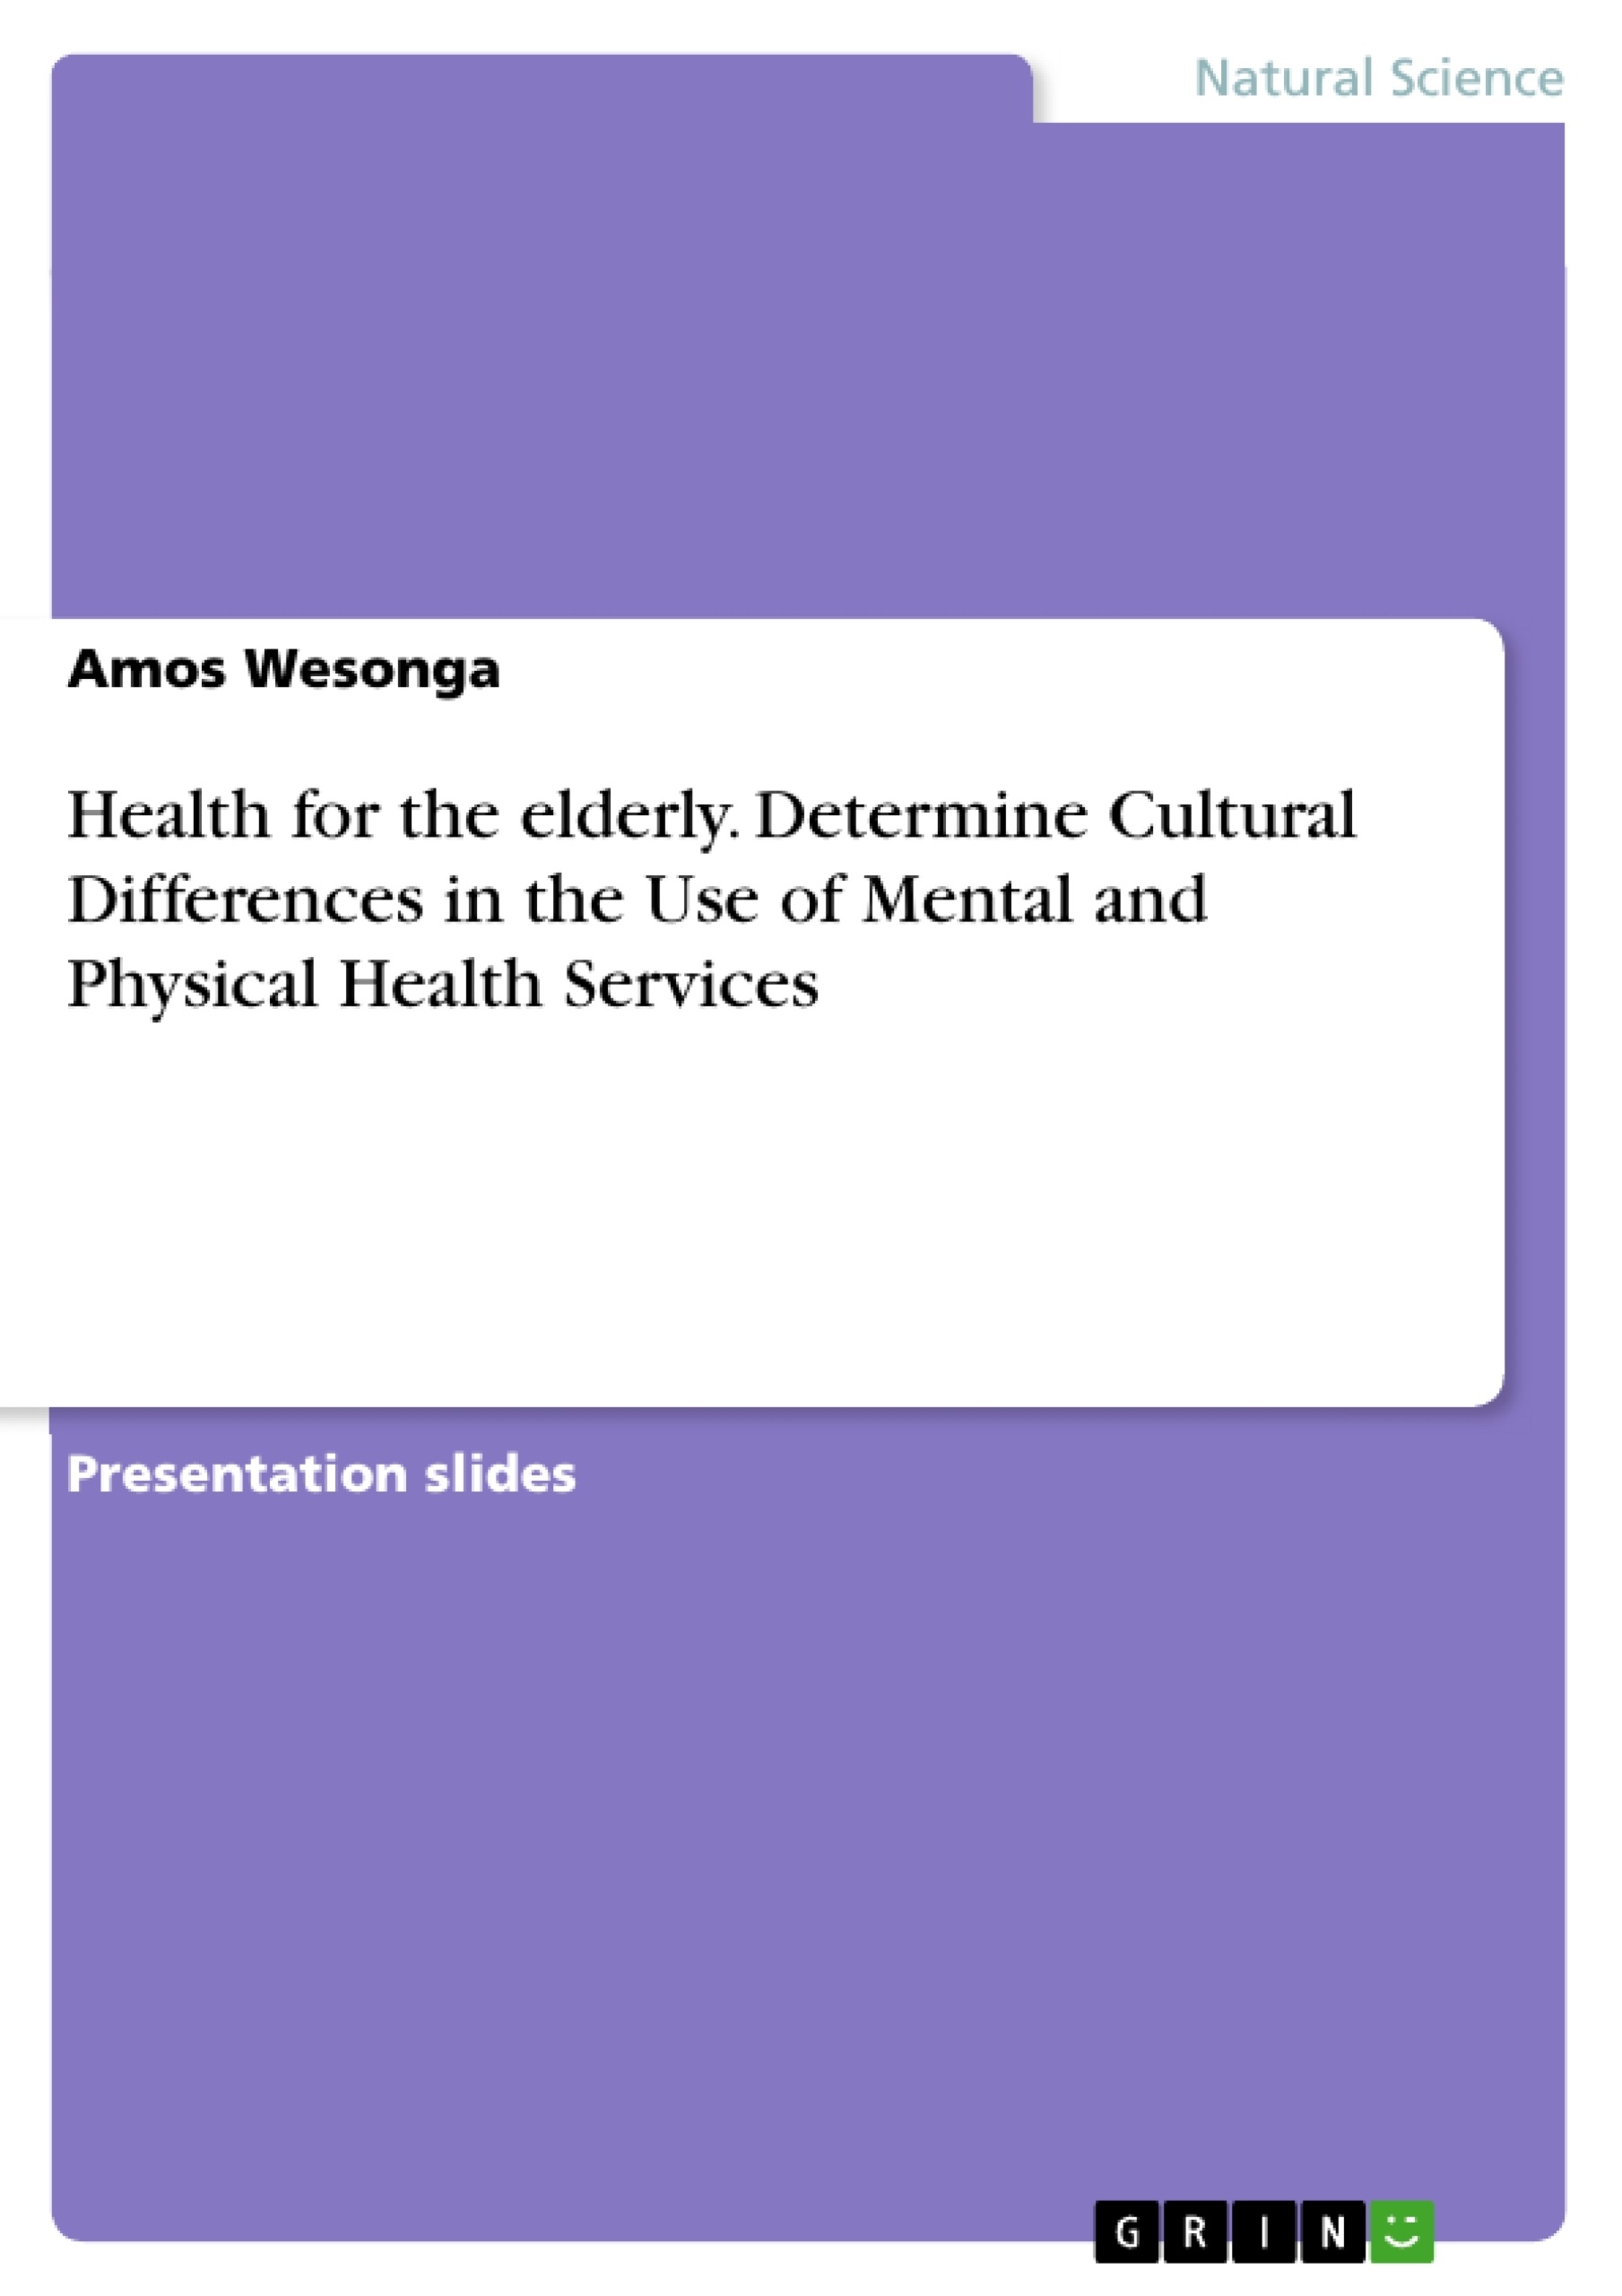 Title: Health for the elderly. Determine Cultural Differences in the Use of Mental and Physical Health Services